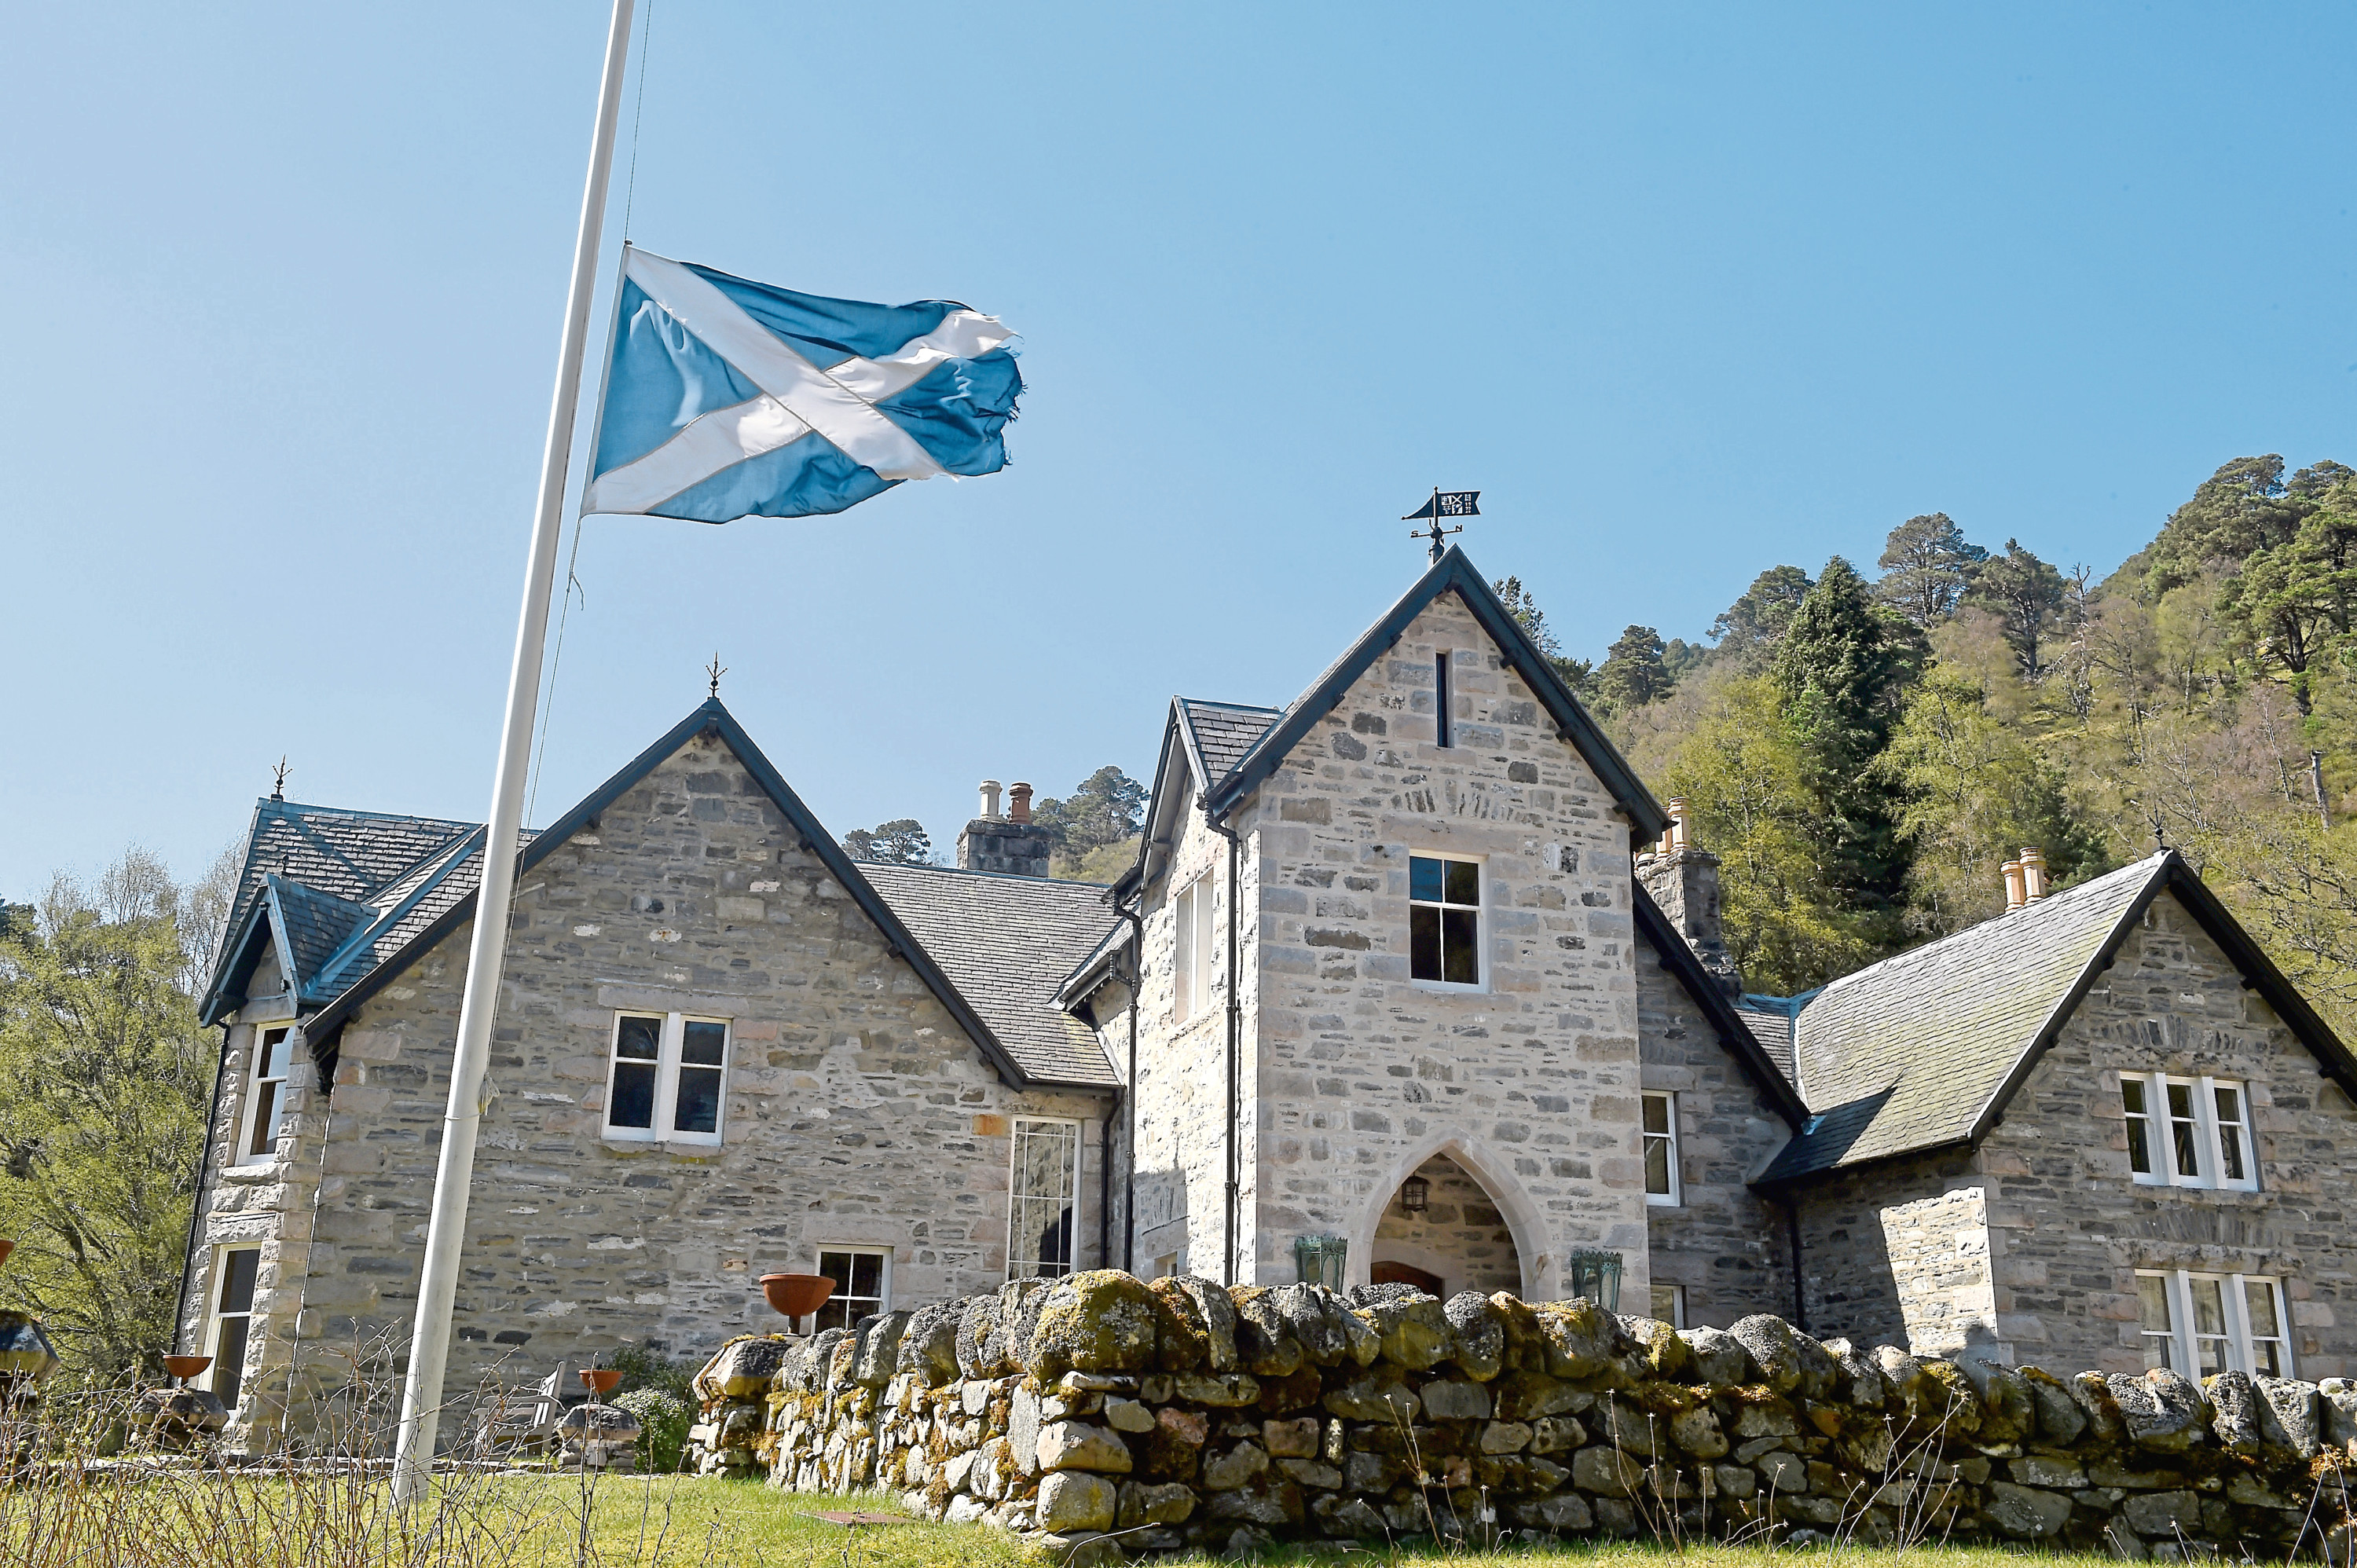 Picture by SANDY McCOOK   22nd April '19
Glenfeshie Estate, the Scottish home of Anders Holch Povlsen. A flag flies at half mast yesterday (Monday) at Glenfeshie Lodge on the estate to mark the tragedy in Sri Lanka.